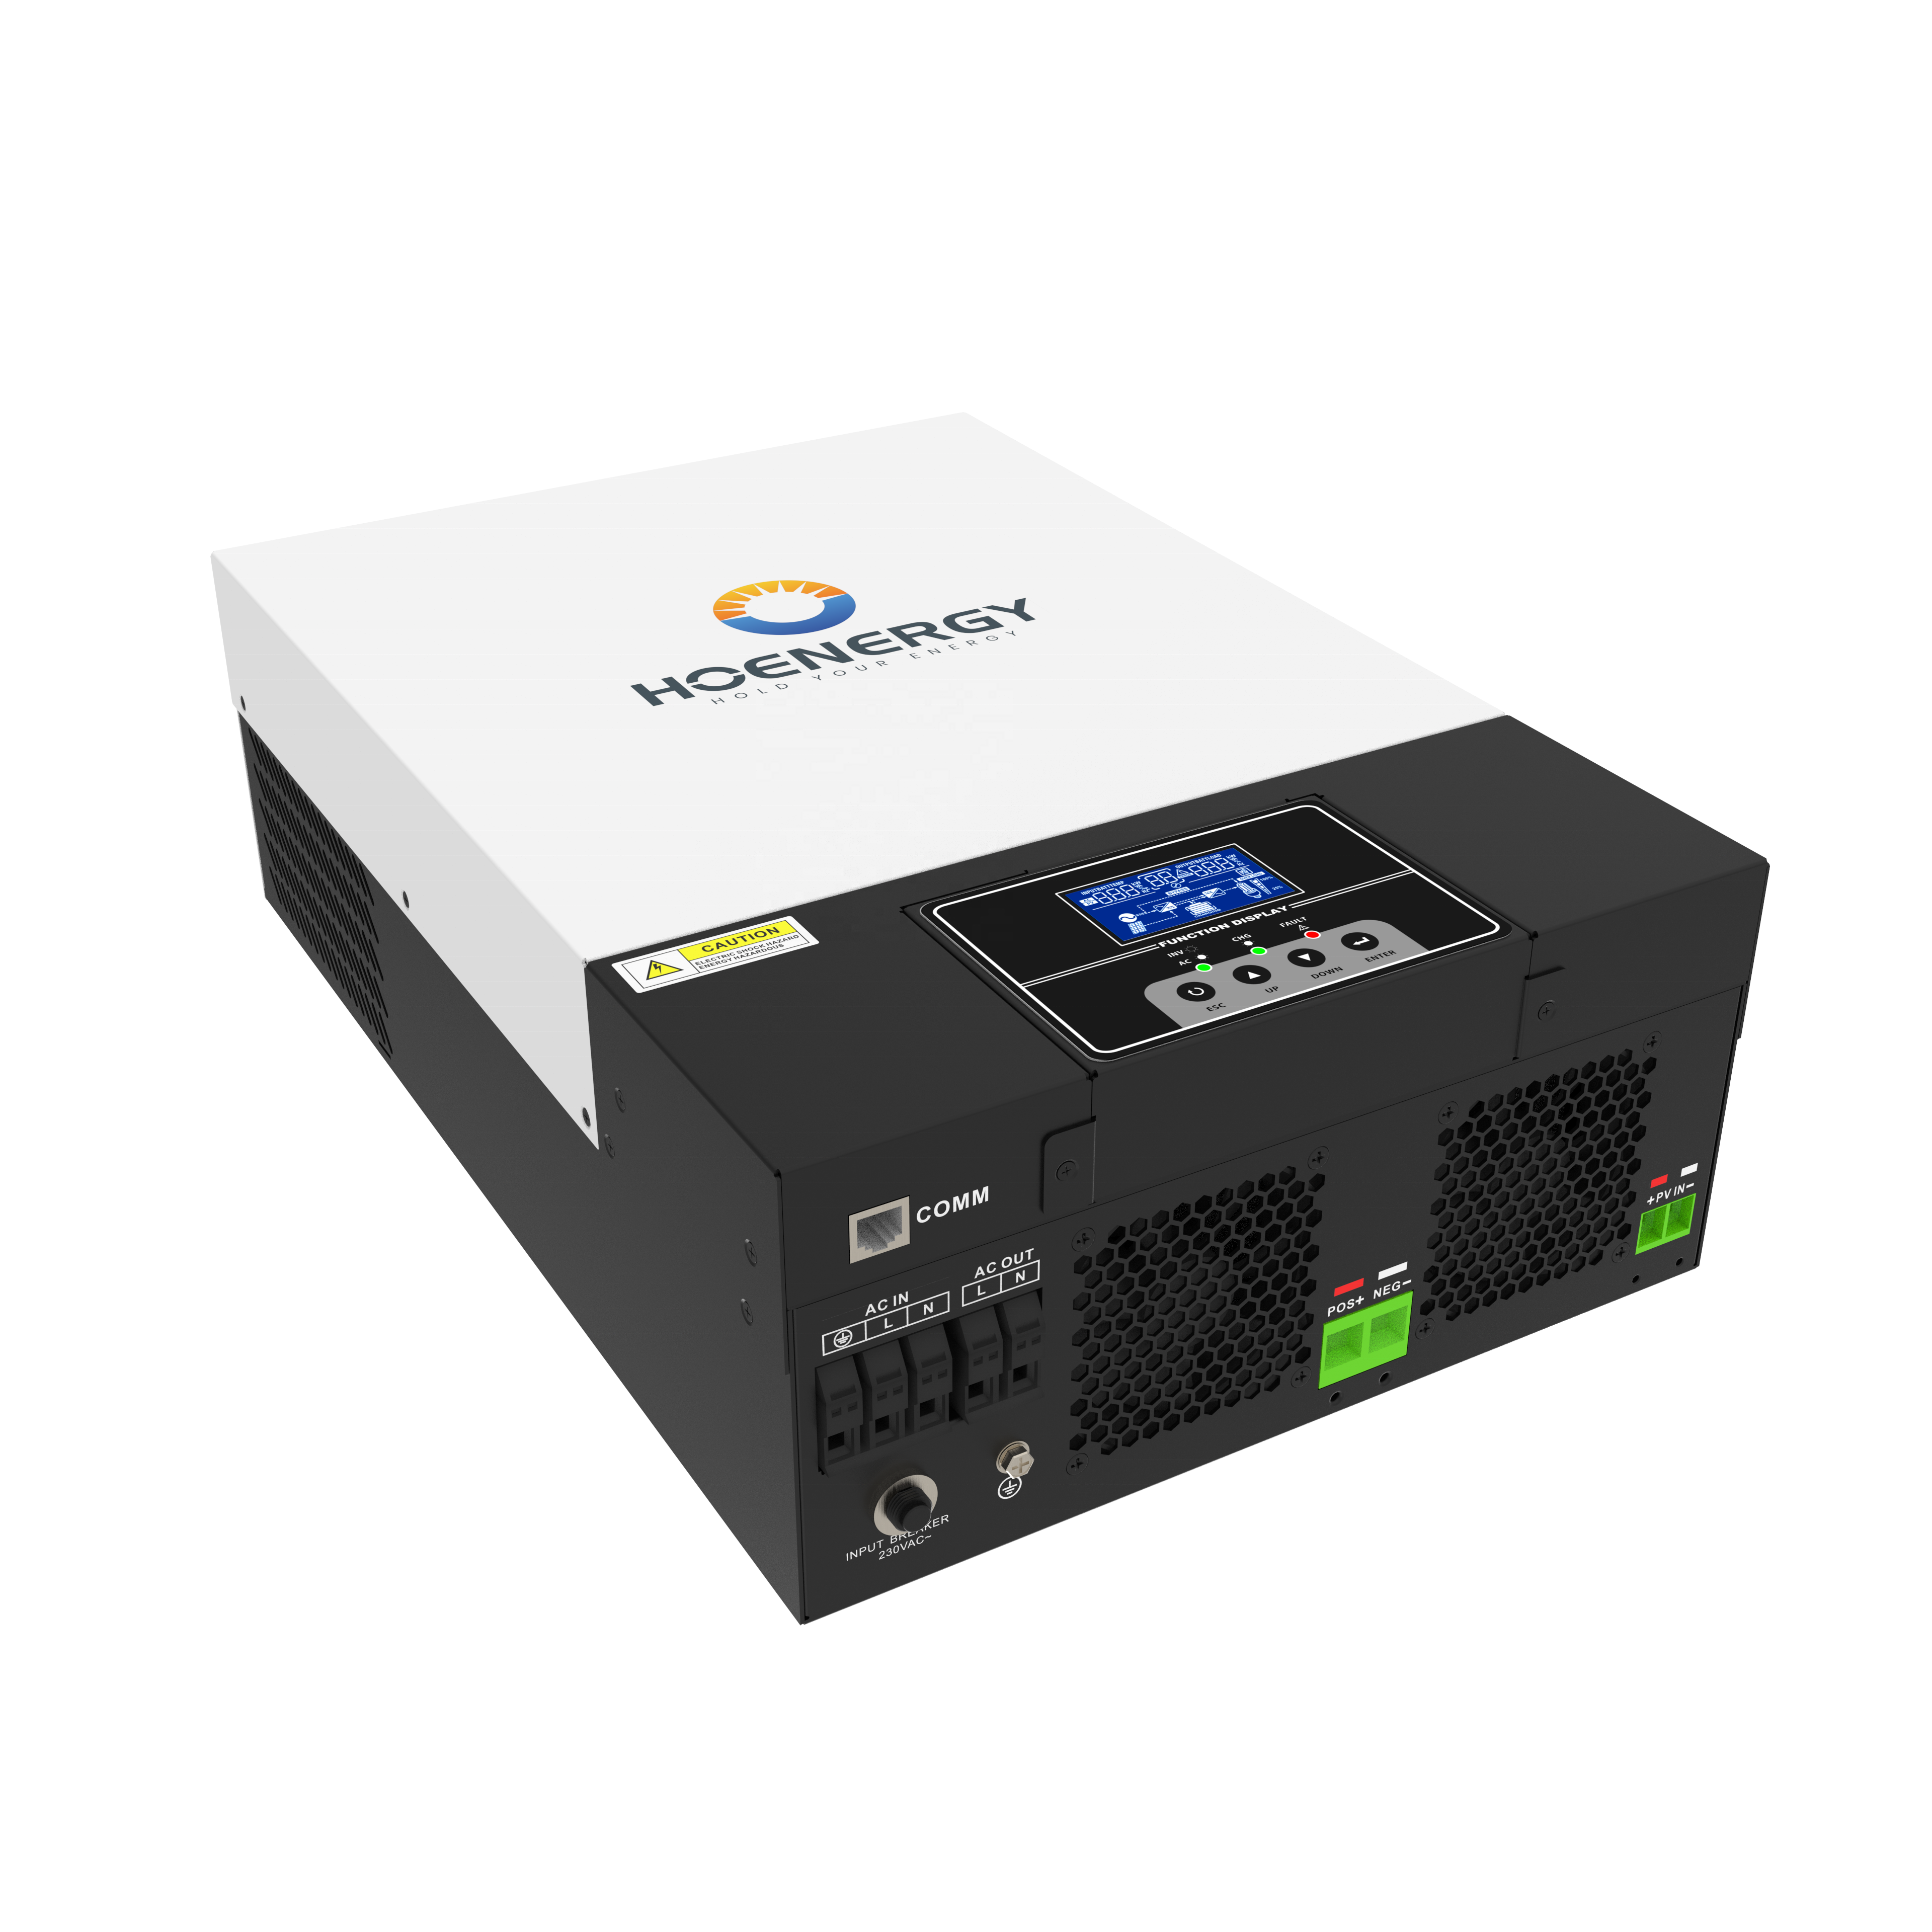 high quality Hoenergy 3500VA 24VDC battery suitable for Africa output power factor 1.0 energy storage off grid inverter